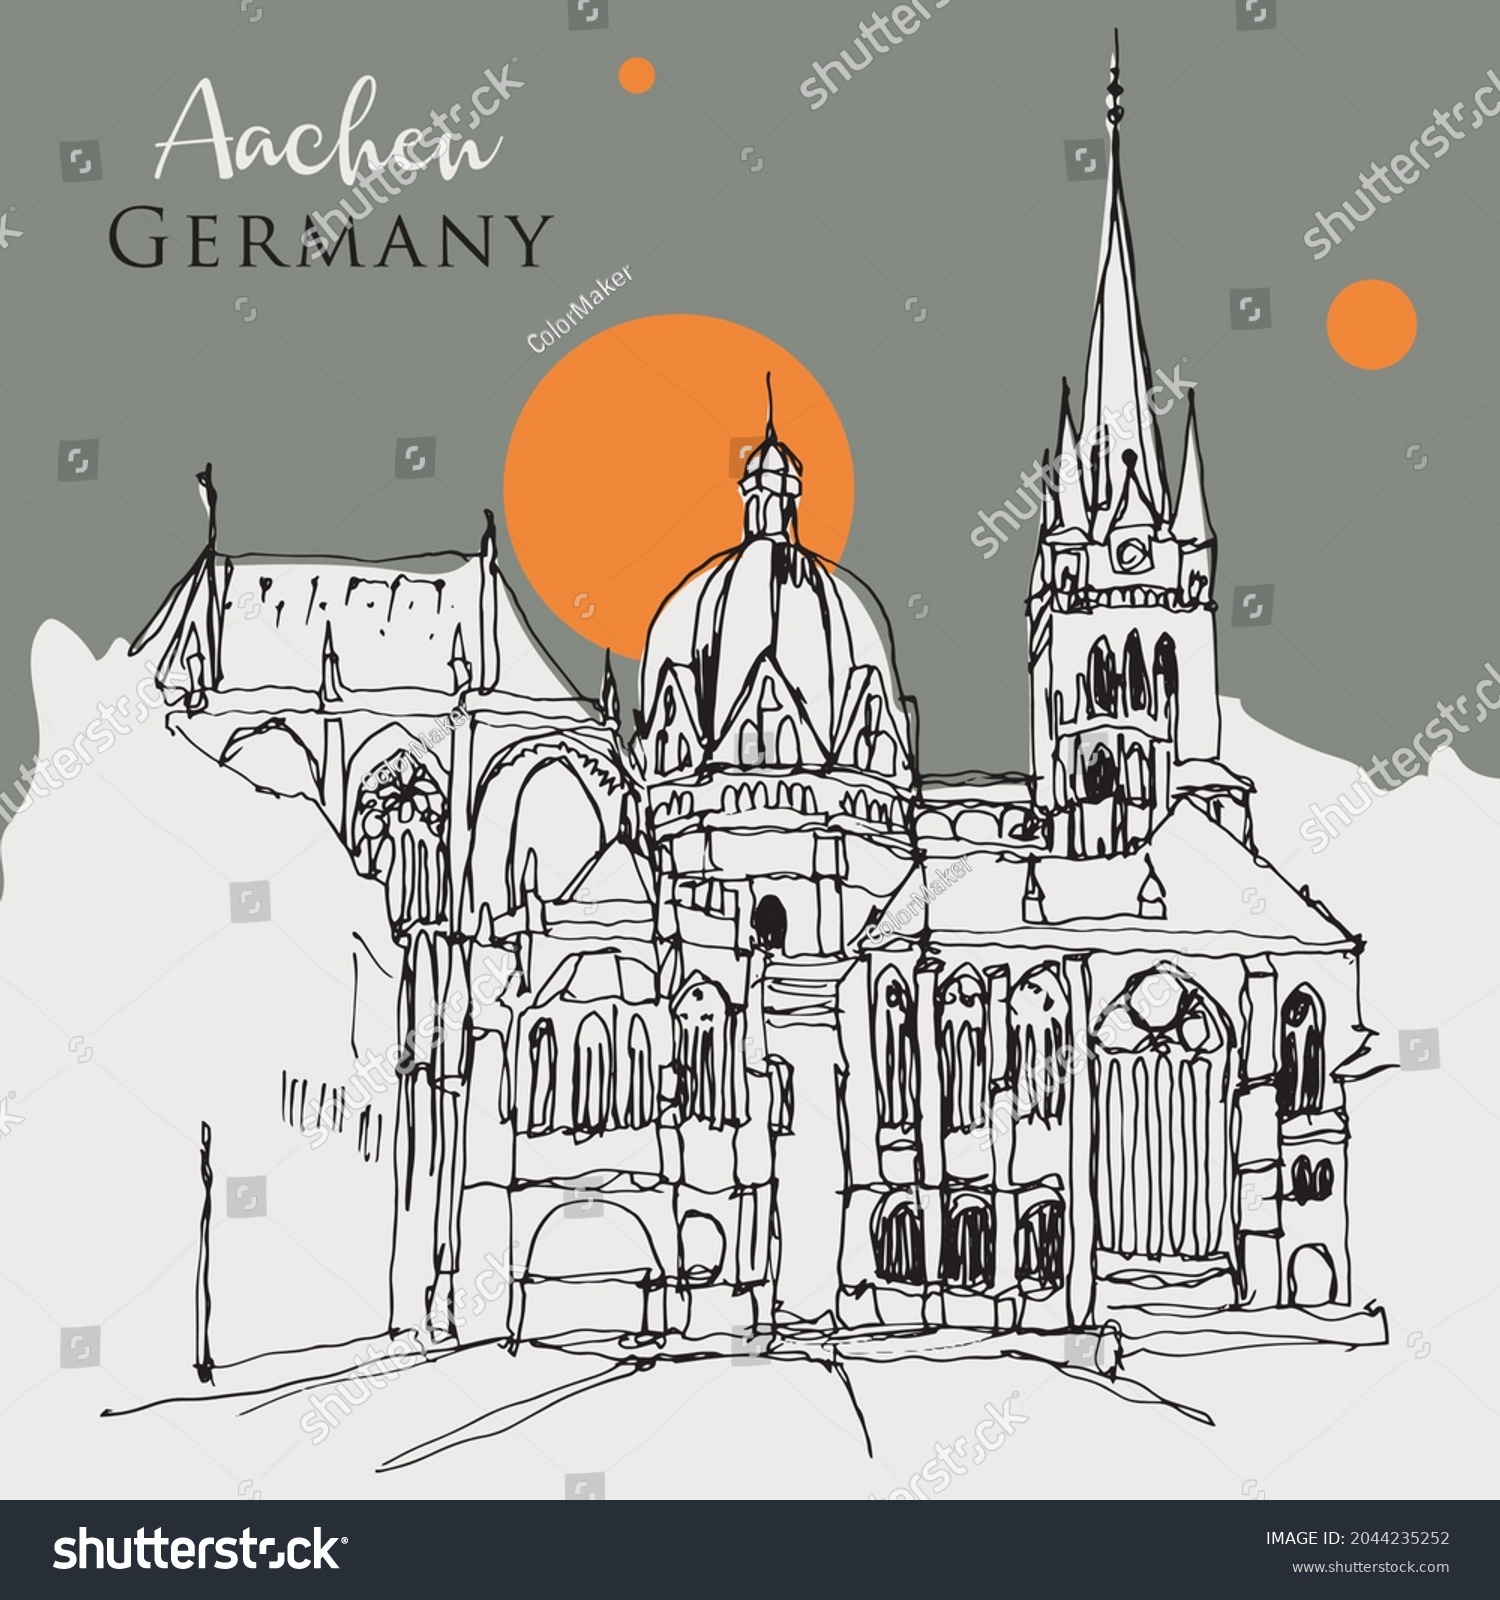 SVG of Vector hand drawn sketch illustration of the Imperial Cathedral in Aachen, Germany svg